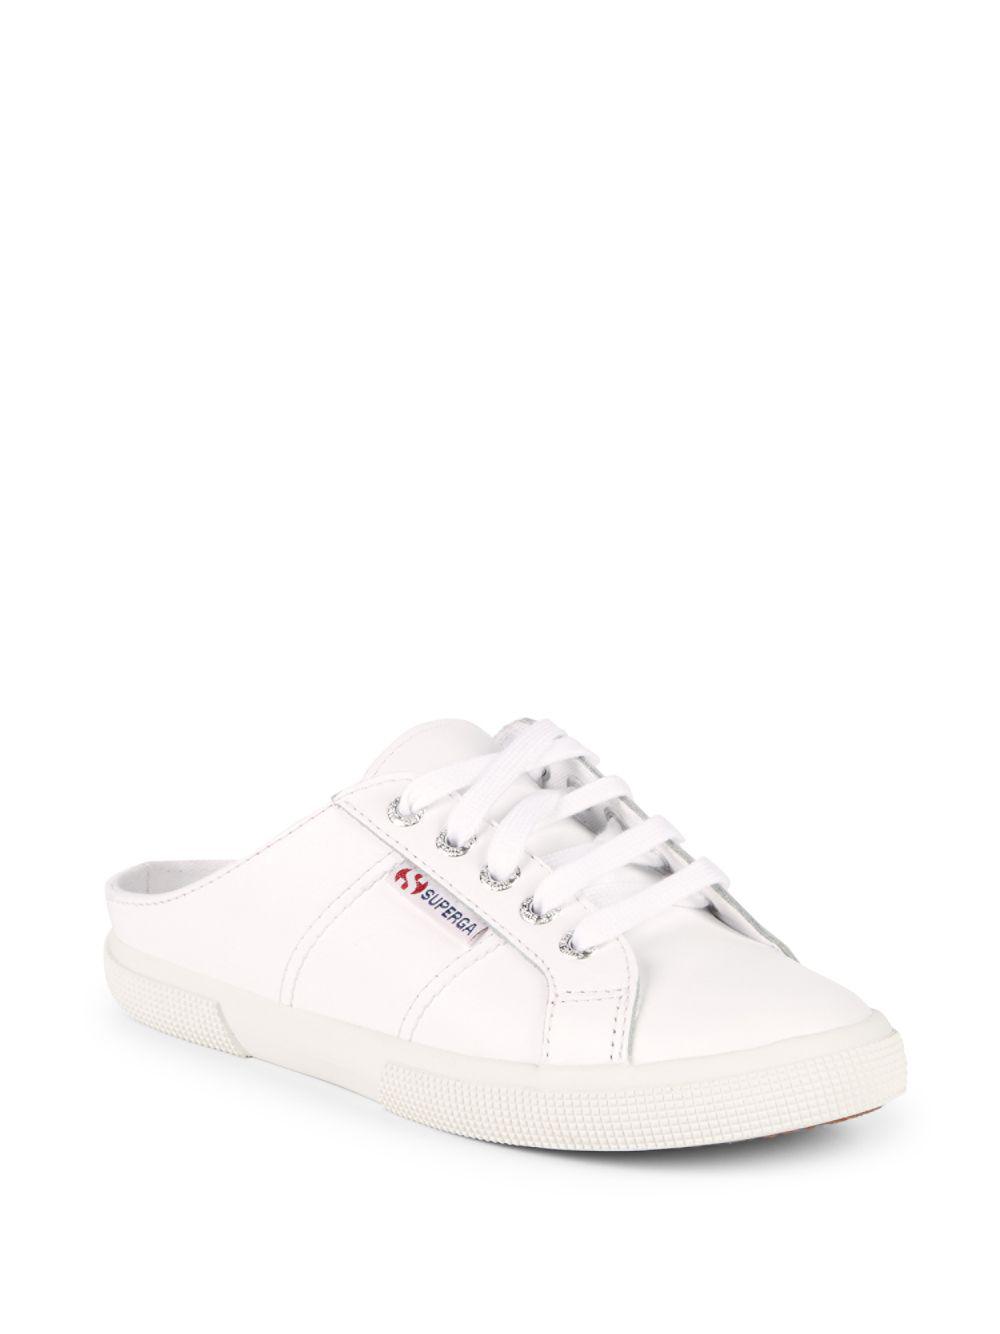 Superga Leather Backless Sneakers in White |